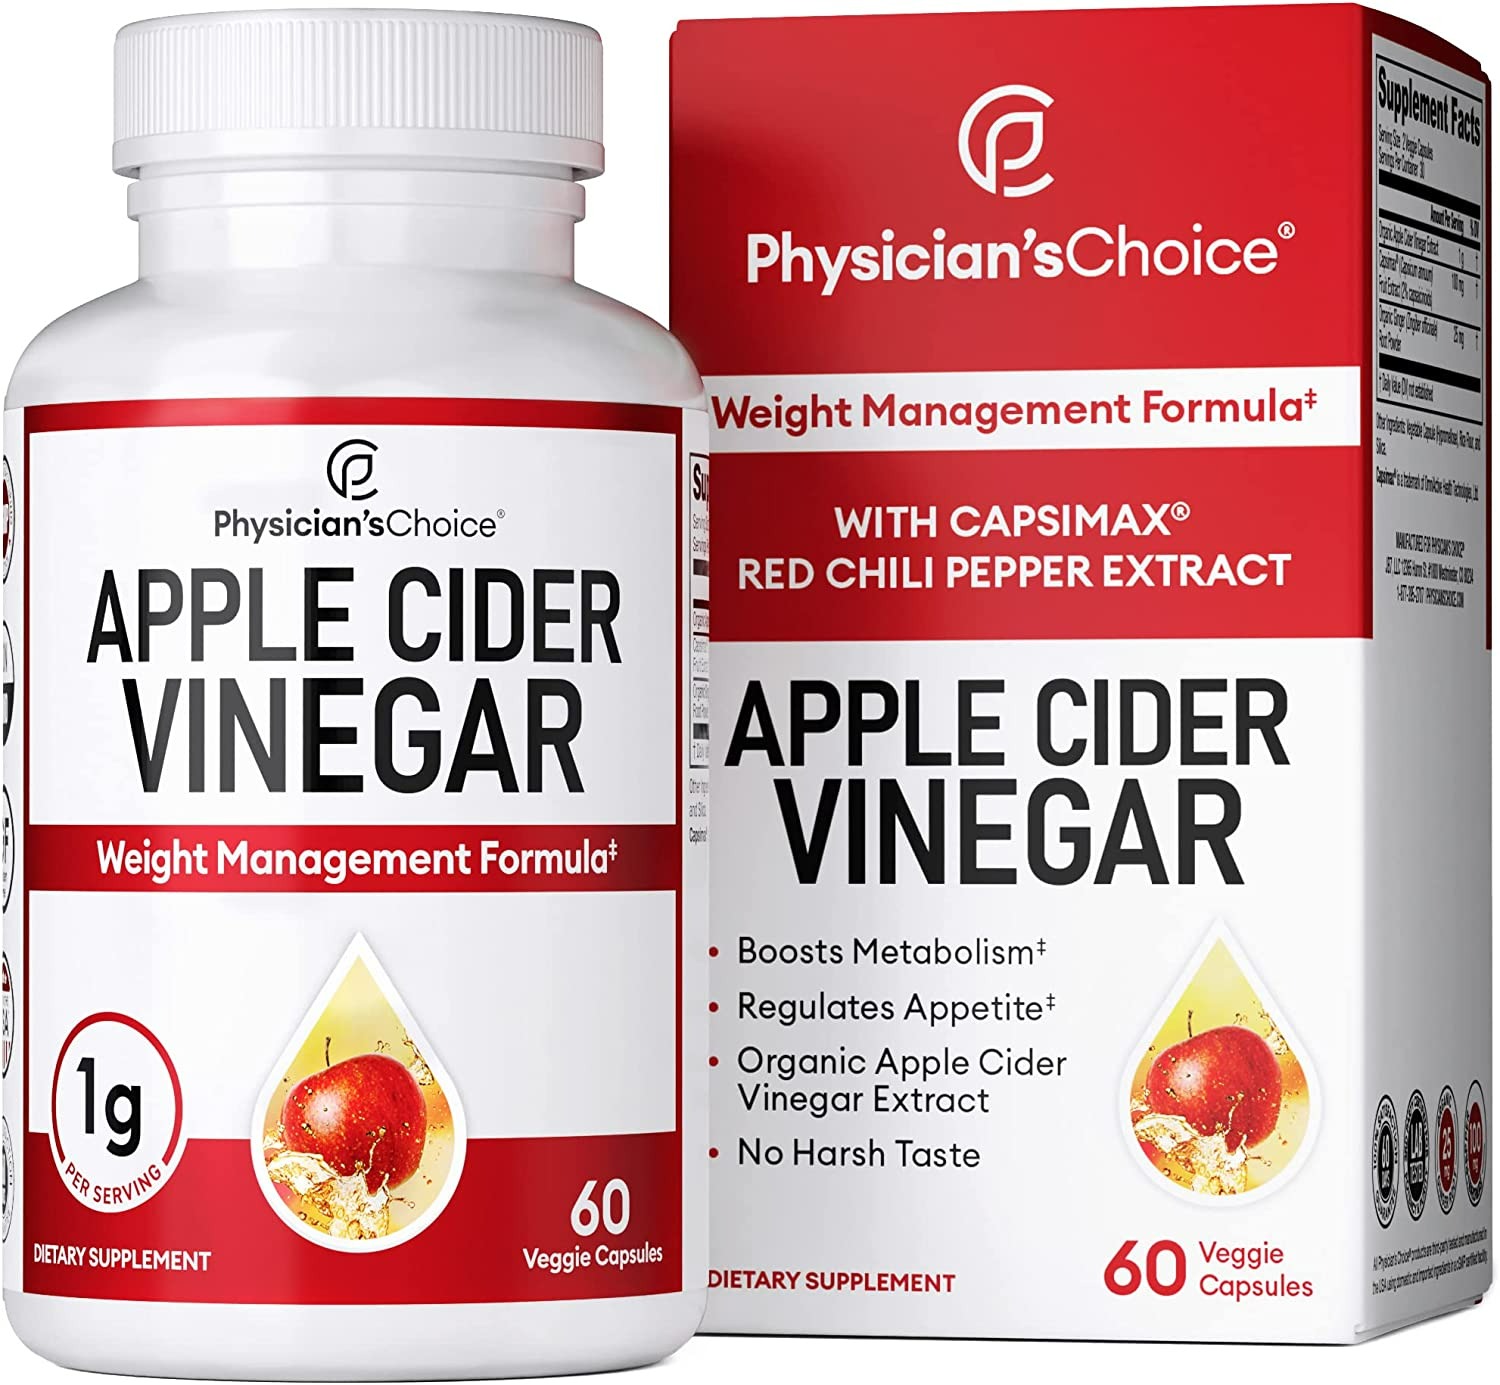 Physician's Choice Organic Apple Cider Vinegar Capsules - Weight Loss Support -  60 Adet